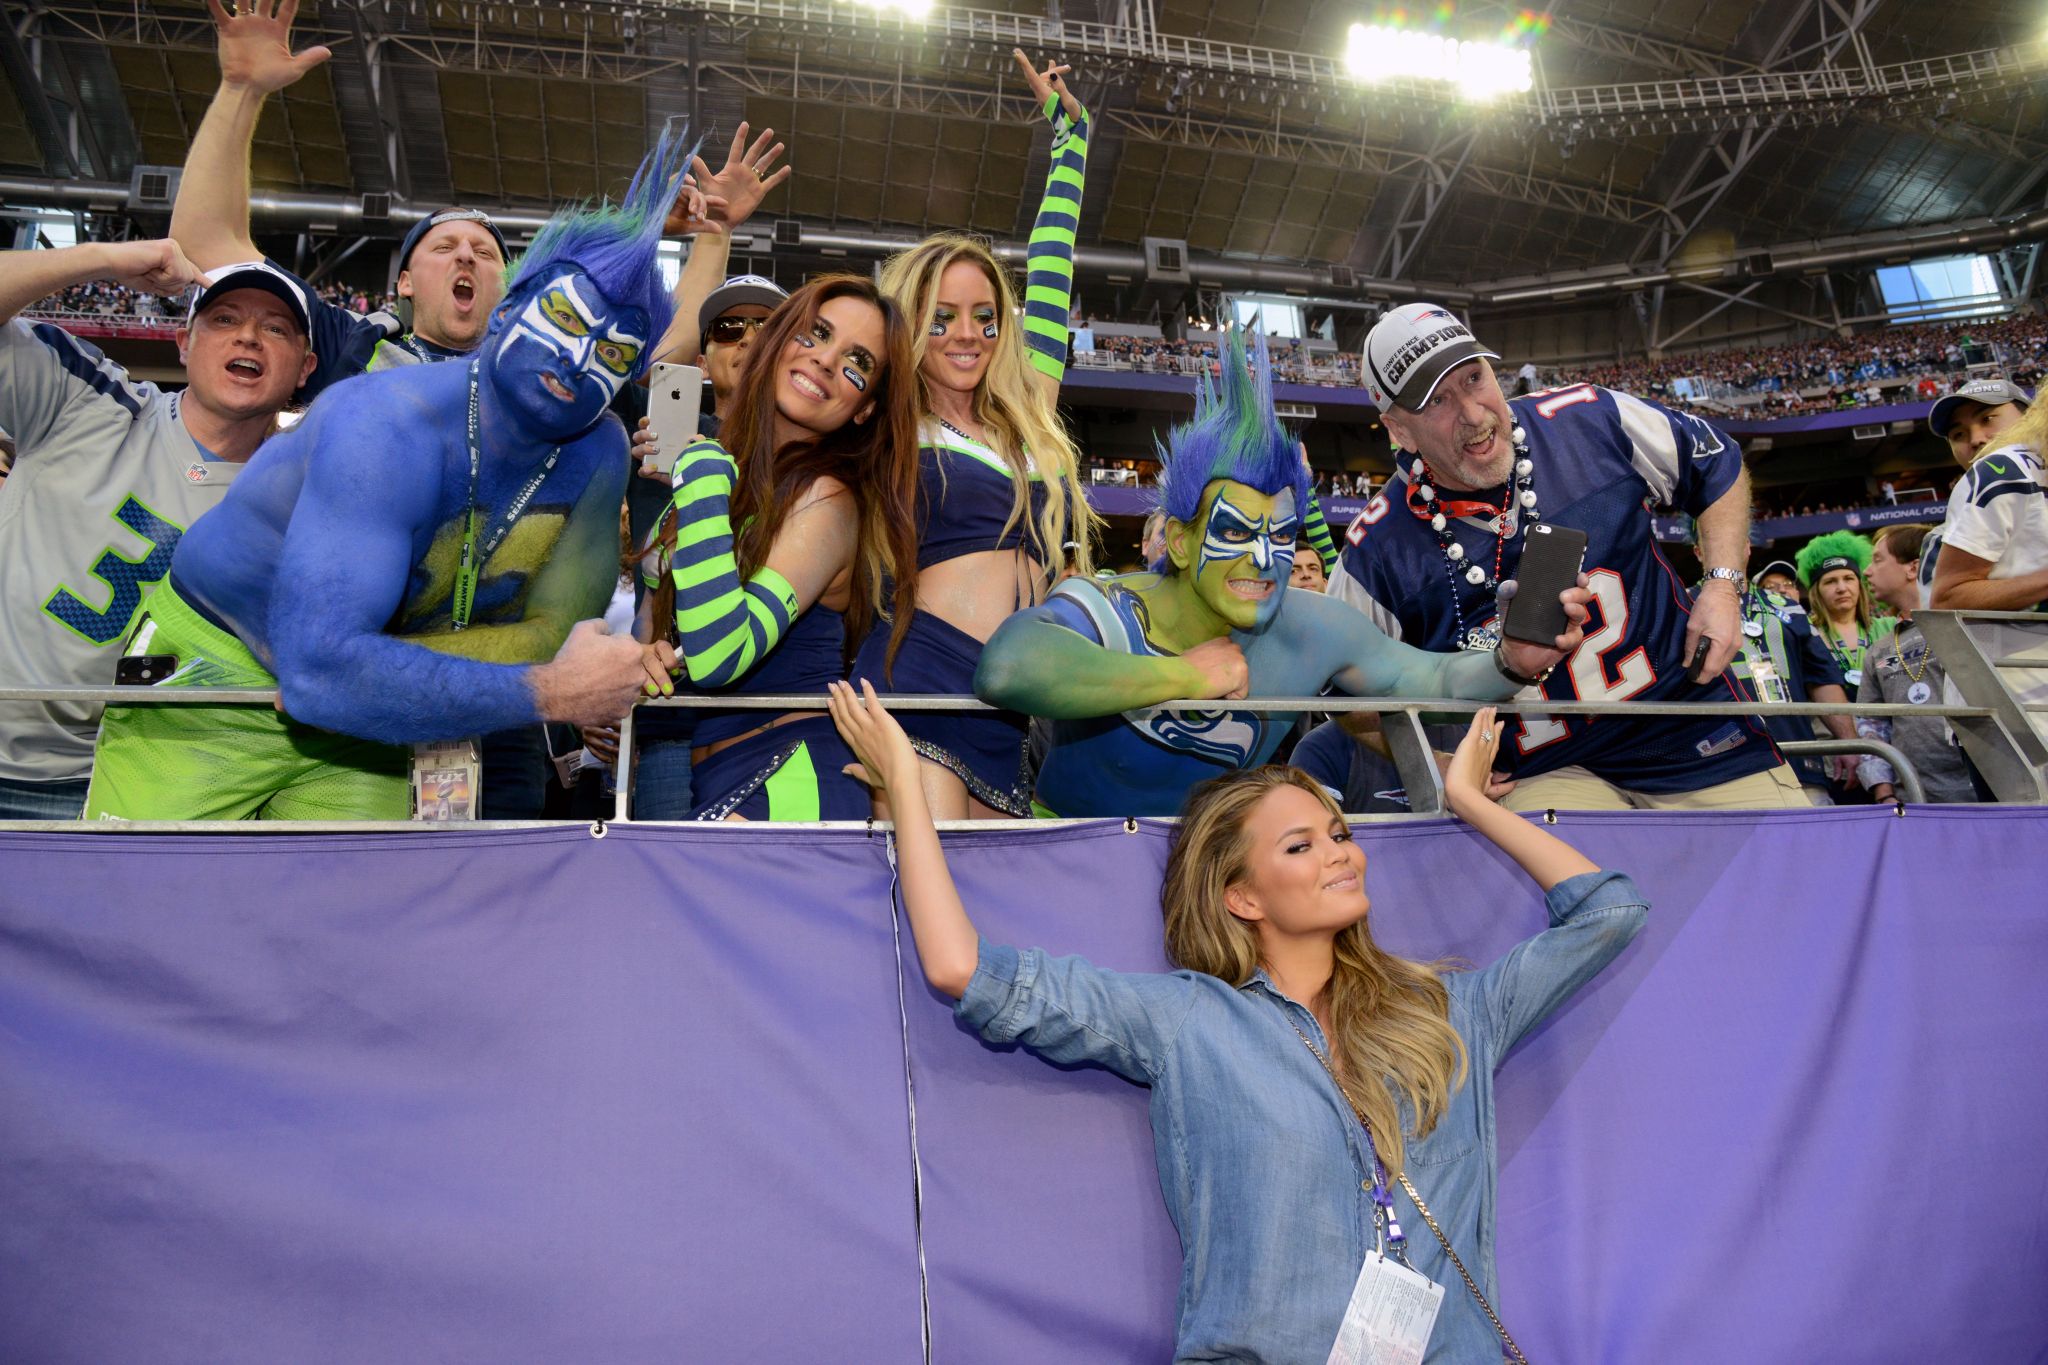 J.K. Rowling and other celebs who root for the Seahawks